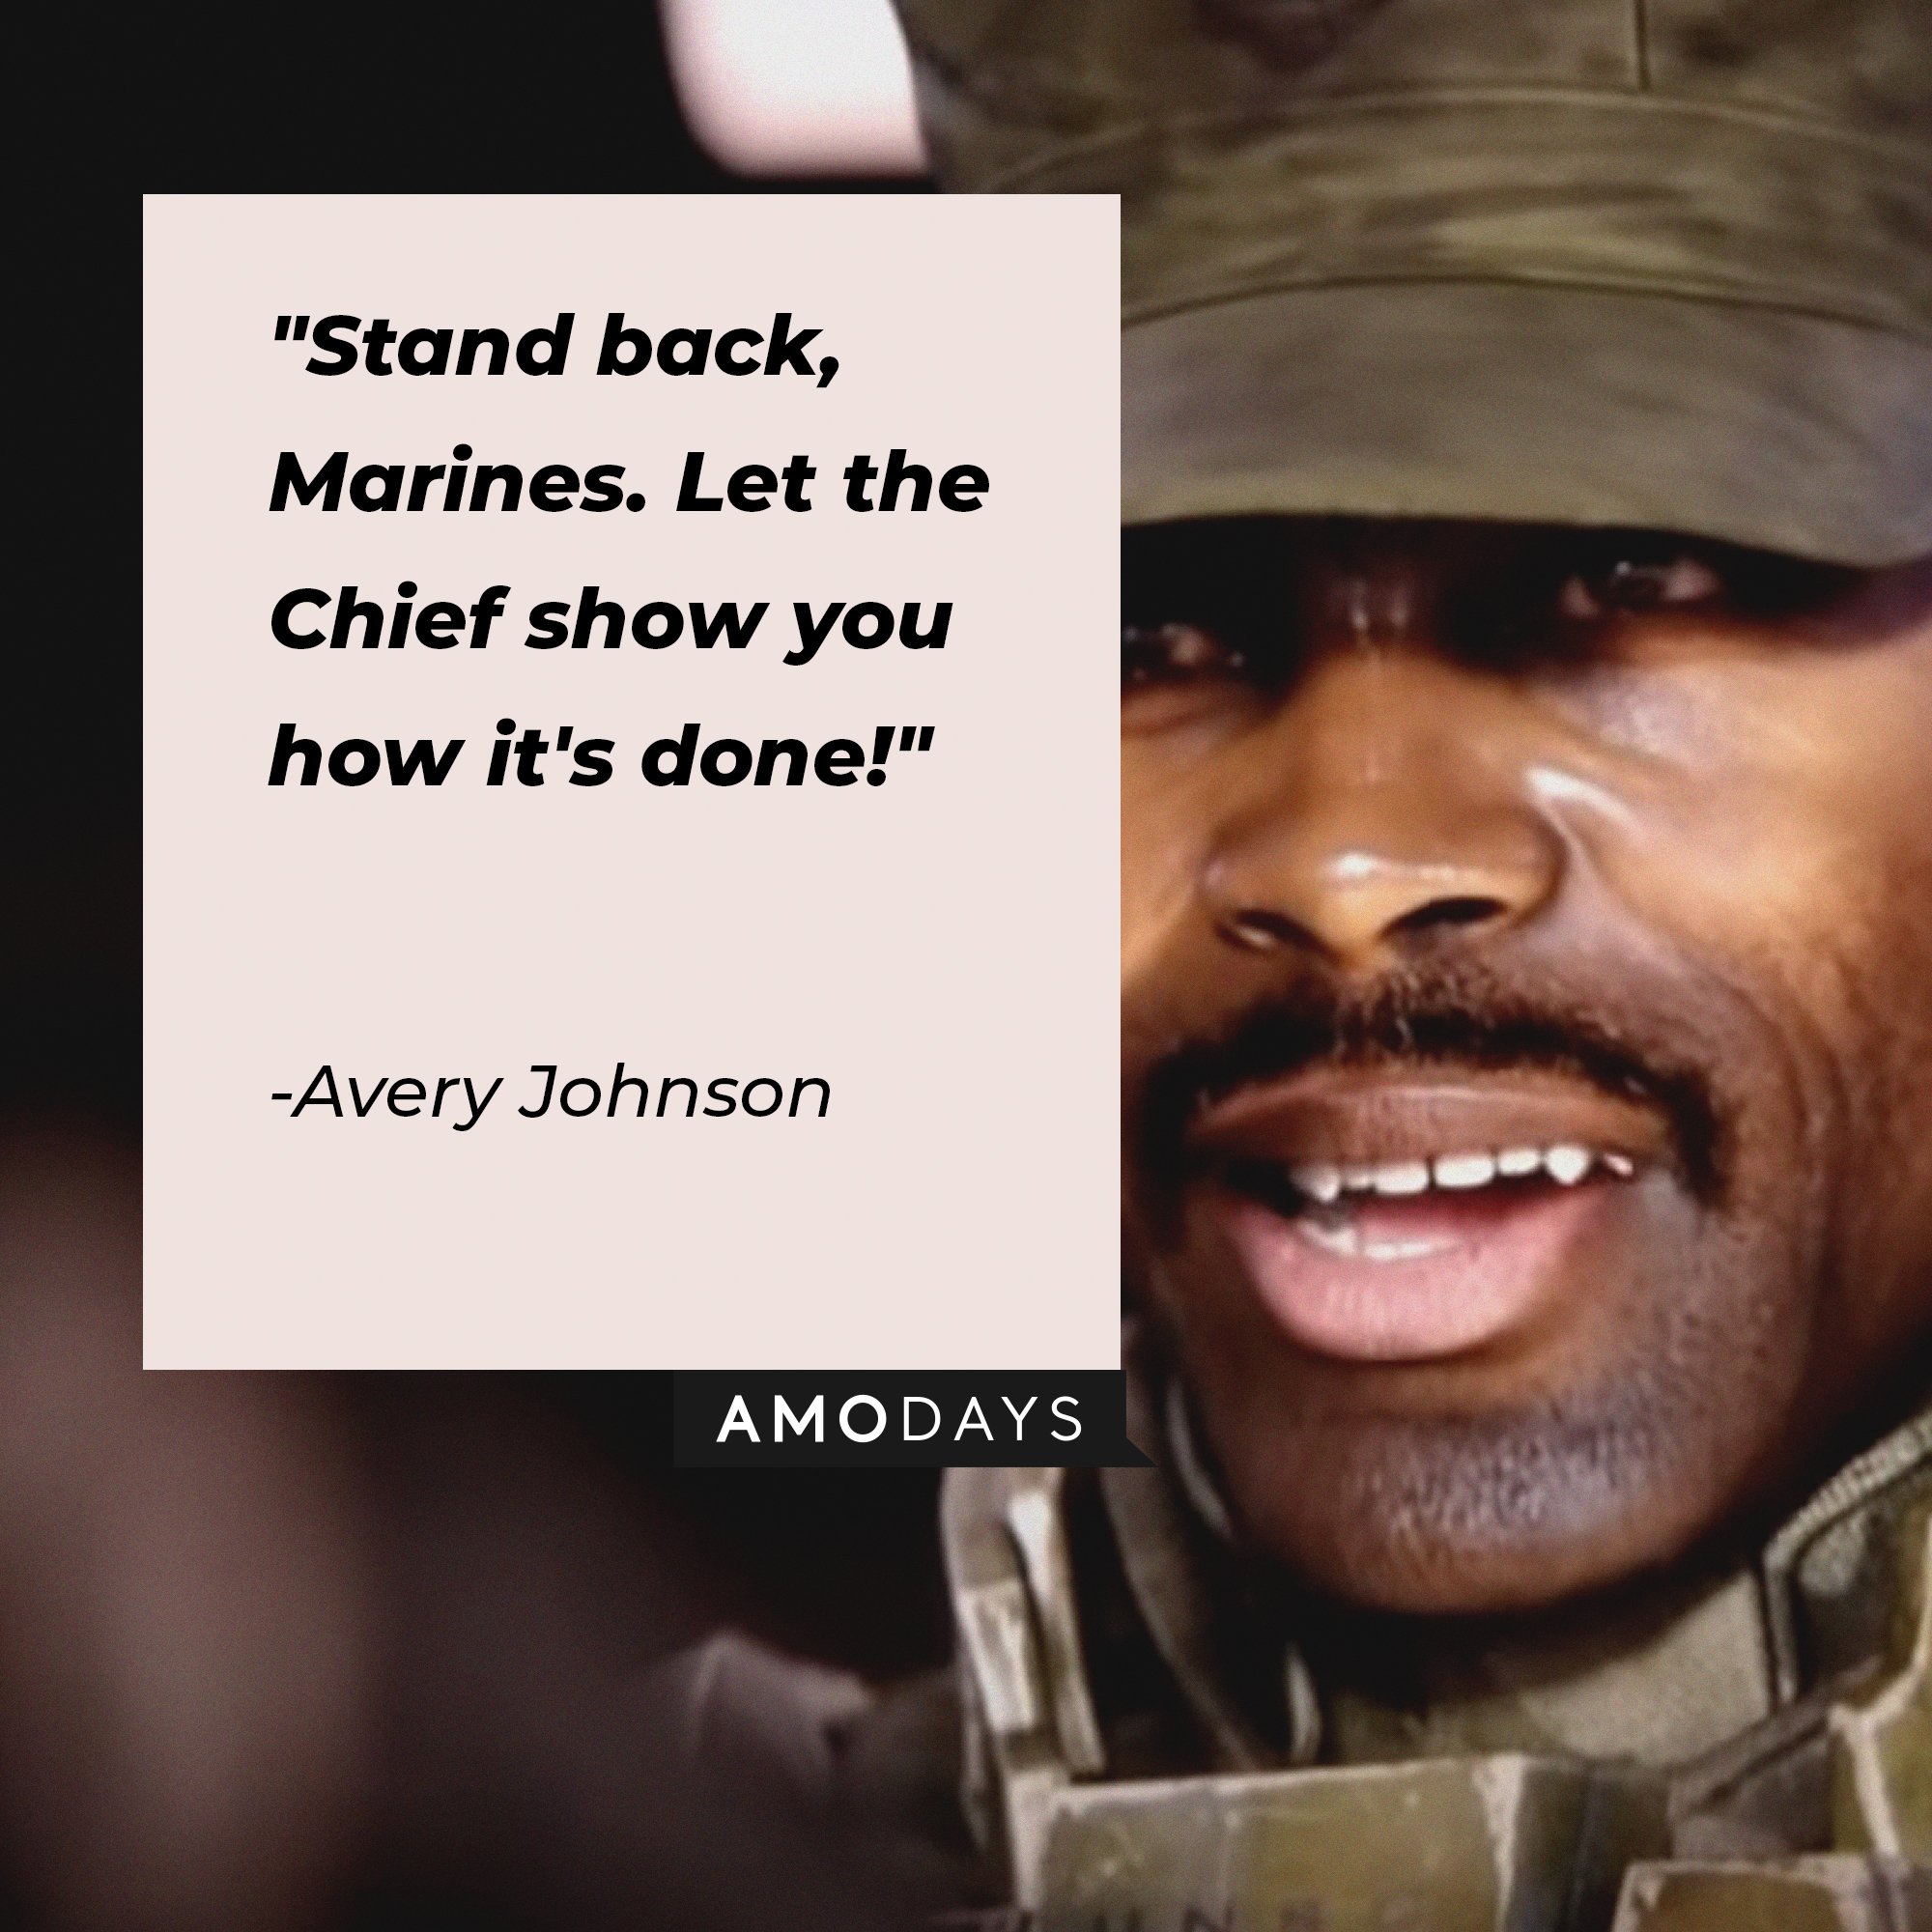 Avery Johnson's quote: "Stand back, Marines. Let the Chief show you how it's done!" | Image: AmoDays